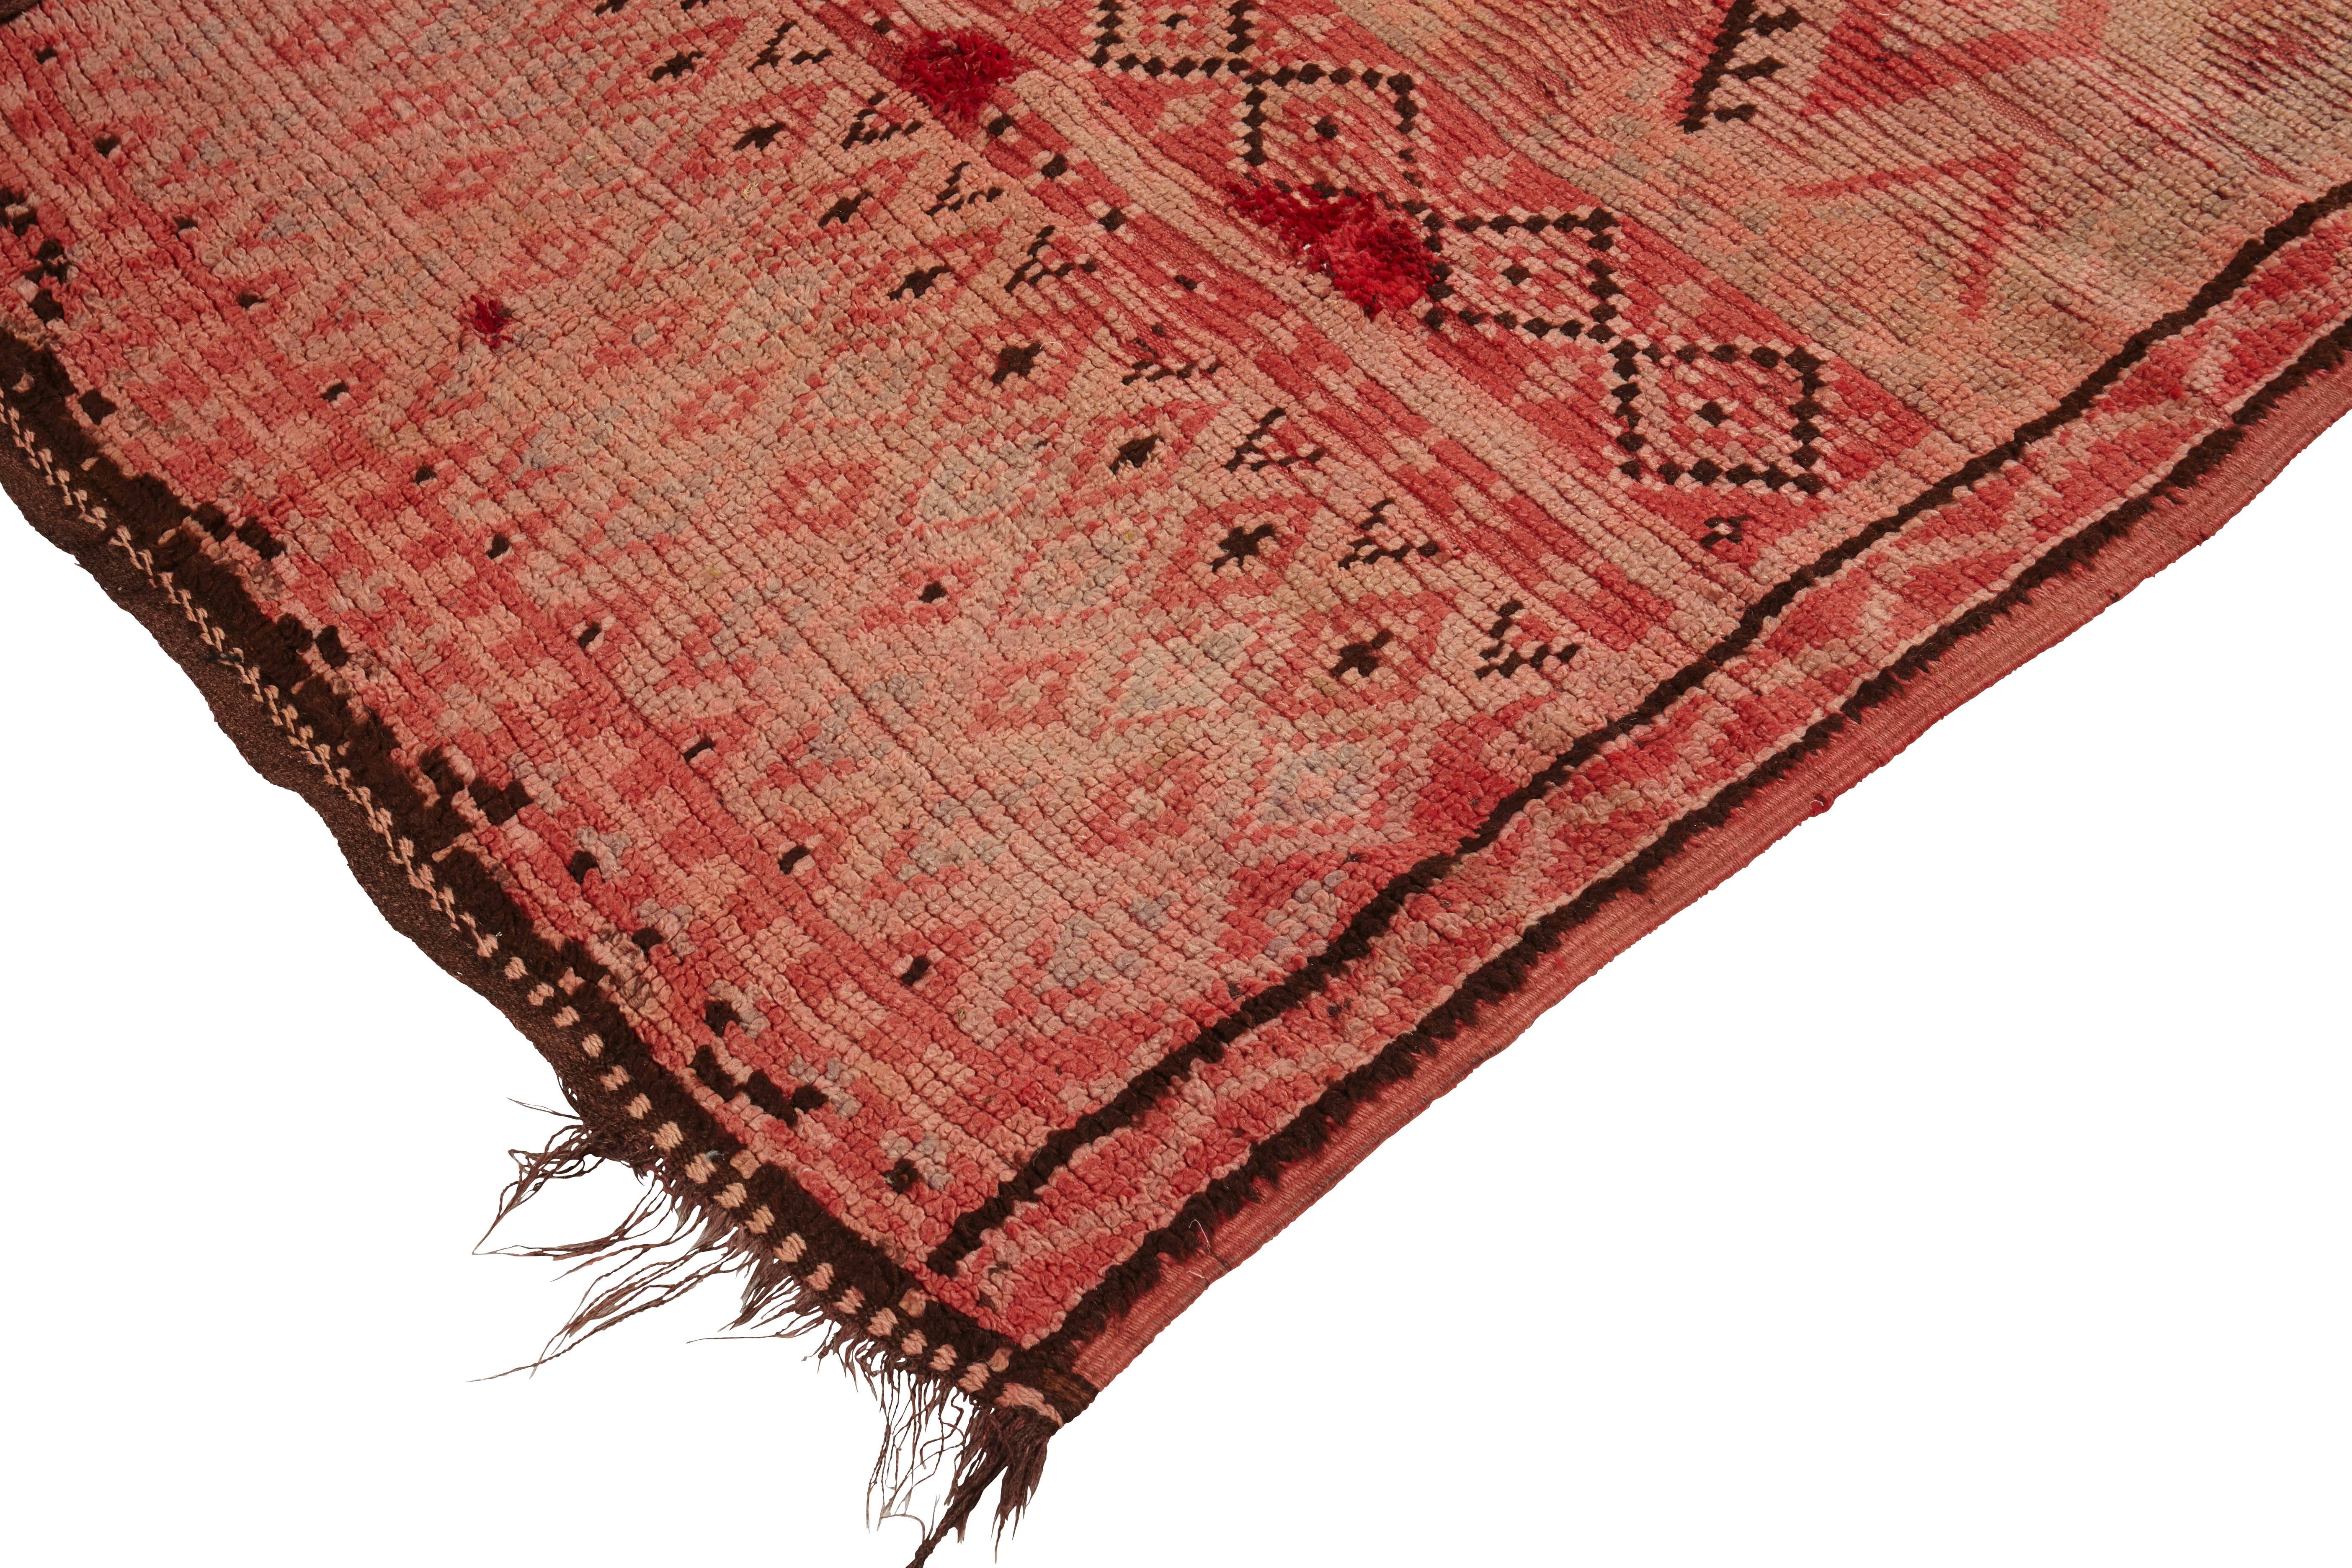 Beni M'Guild rug. 
Middle Atlas Mountains,
Morocco,
mid-late 20th century.
Wool, low pile.

Size: 440 x 155cm.

This large runner rug has been hand woven with a short pile of soft wool in varying shades of pink. There is some minor fading